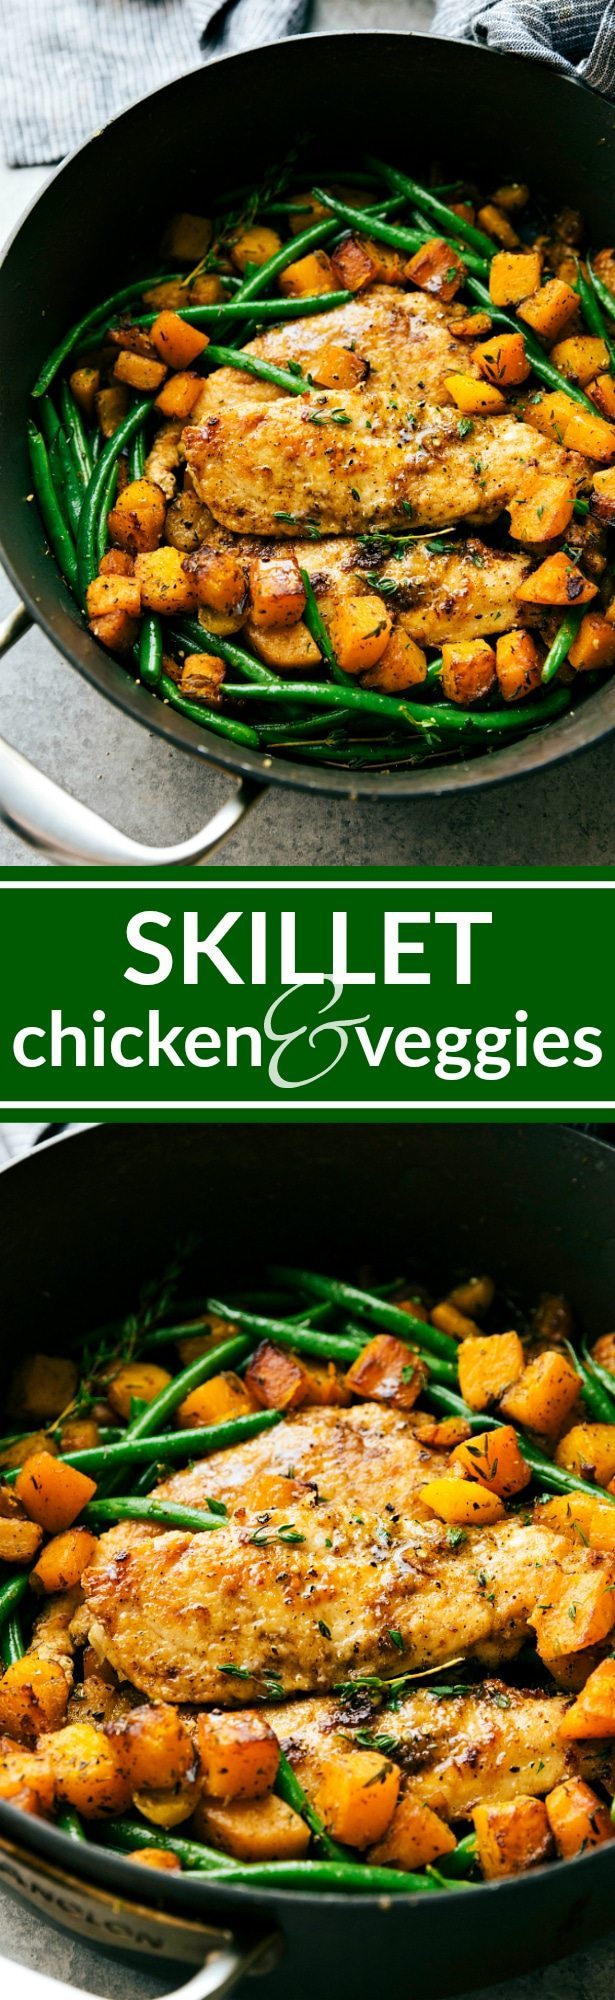 A delicious pan seared chicken, butternut squash, and green bean skillet dinner. An easy, family-friendly, 30-minute meal! via chelseasmessyapron.com